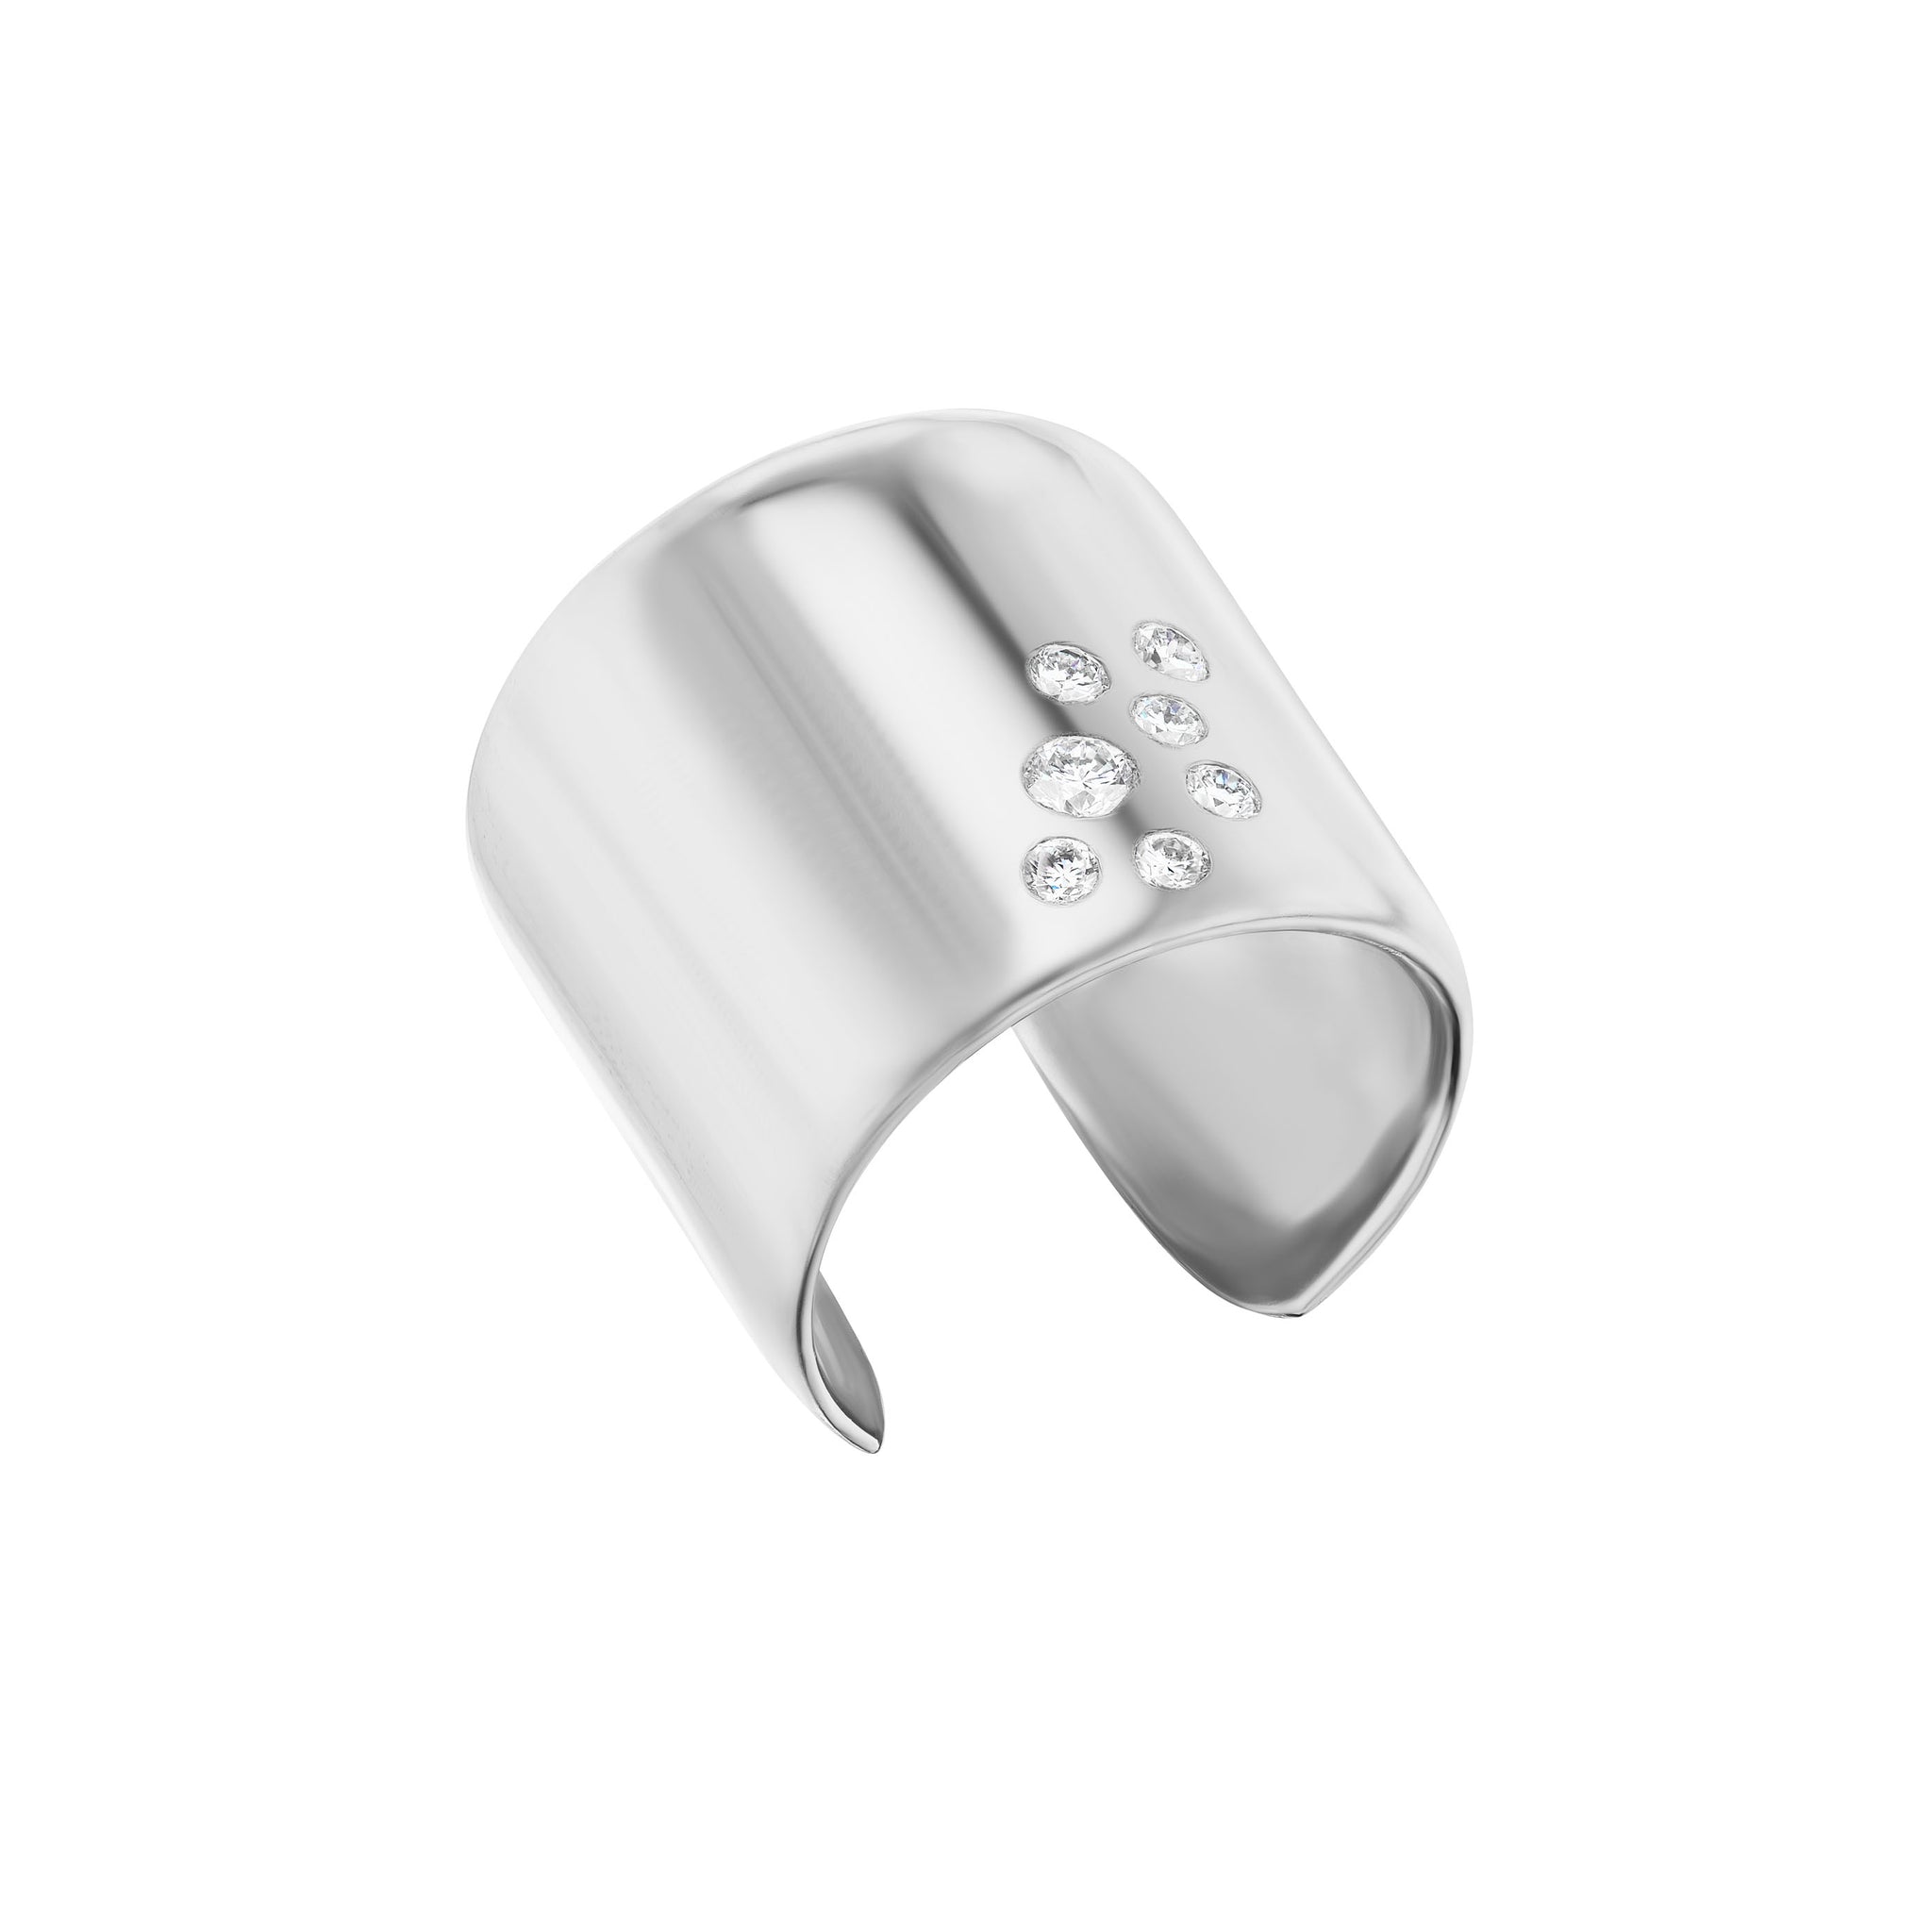 STONED CUFF RING